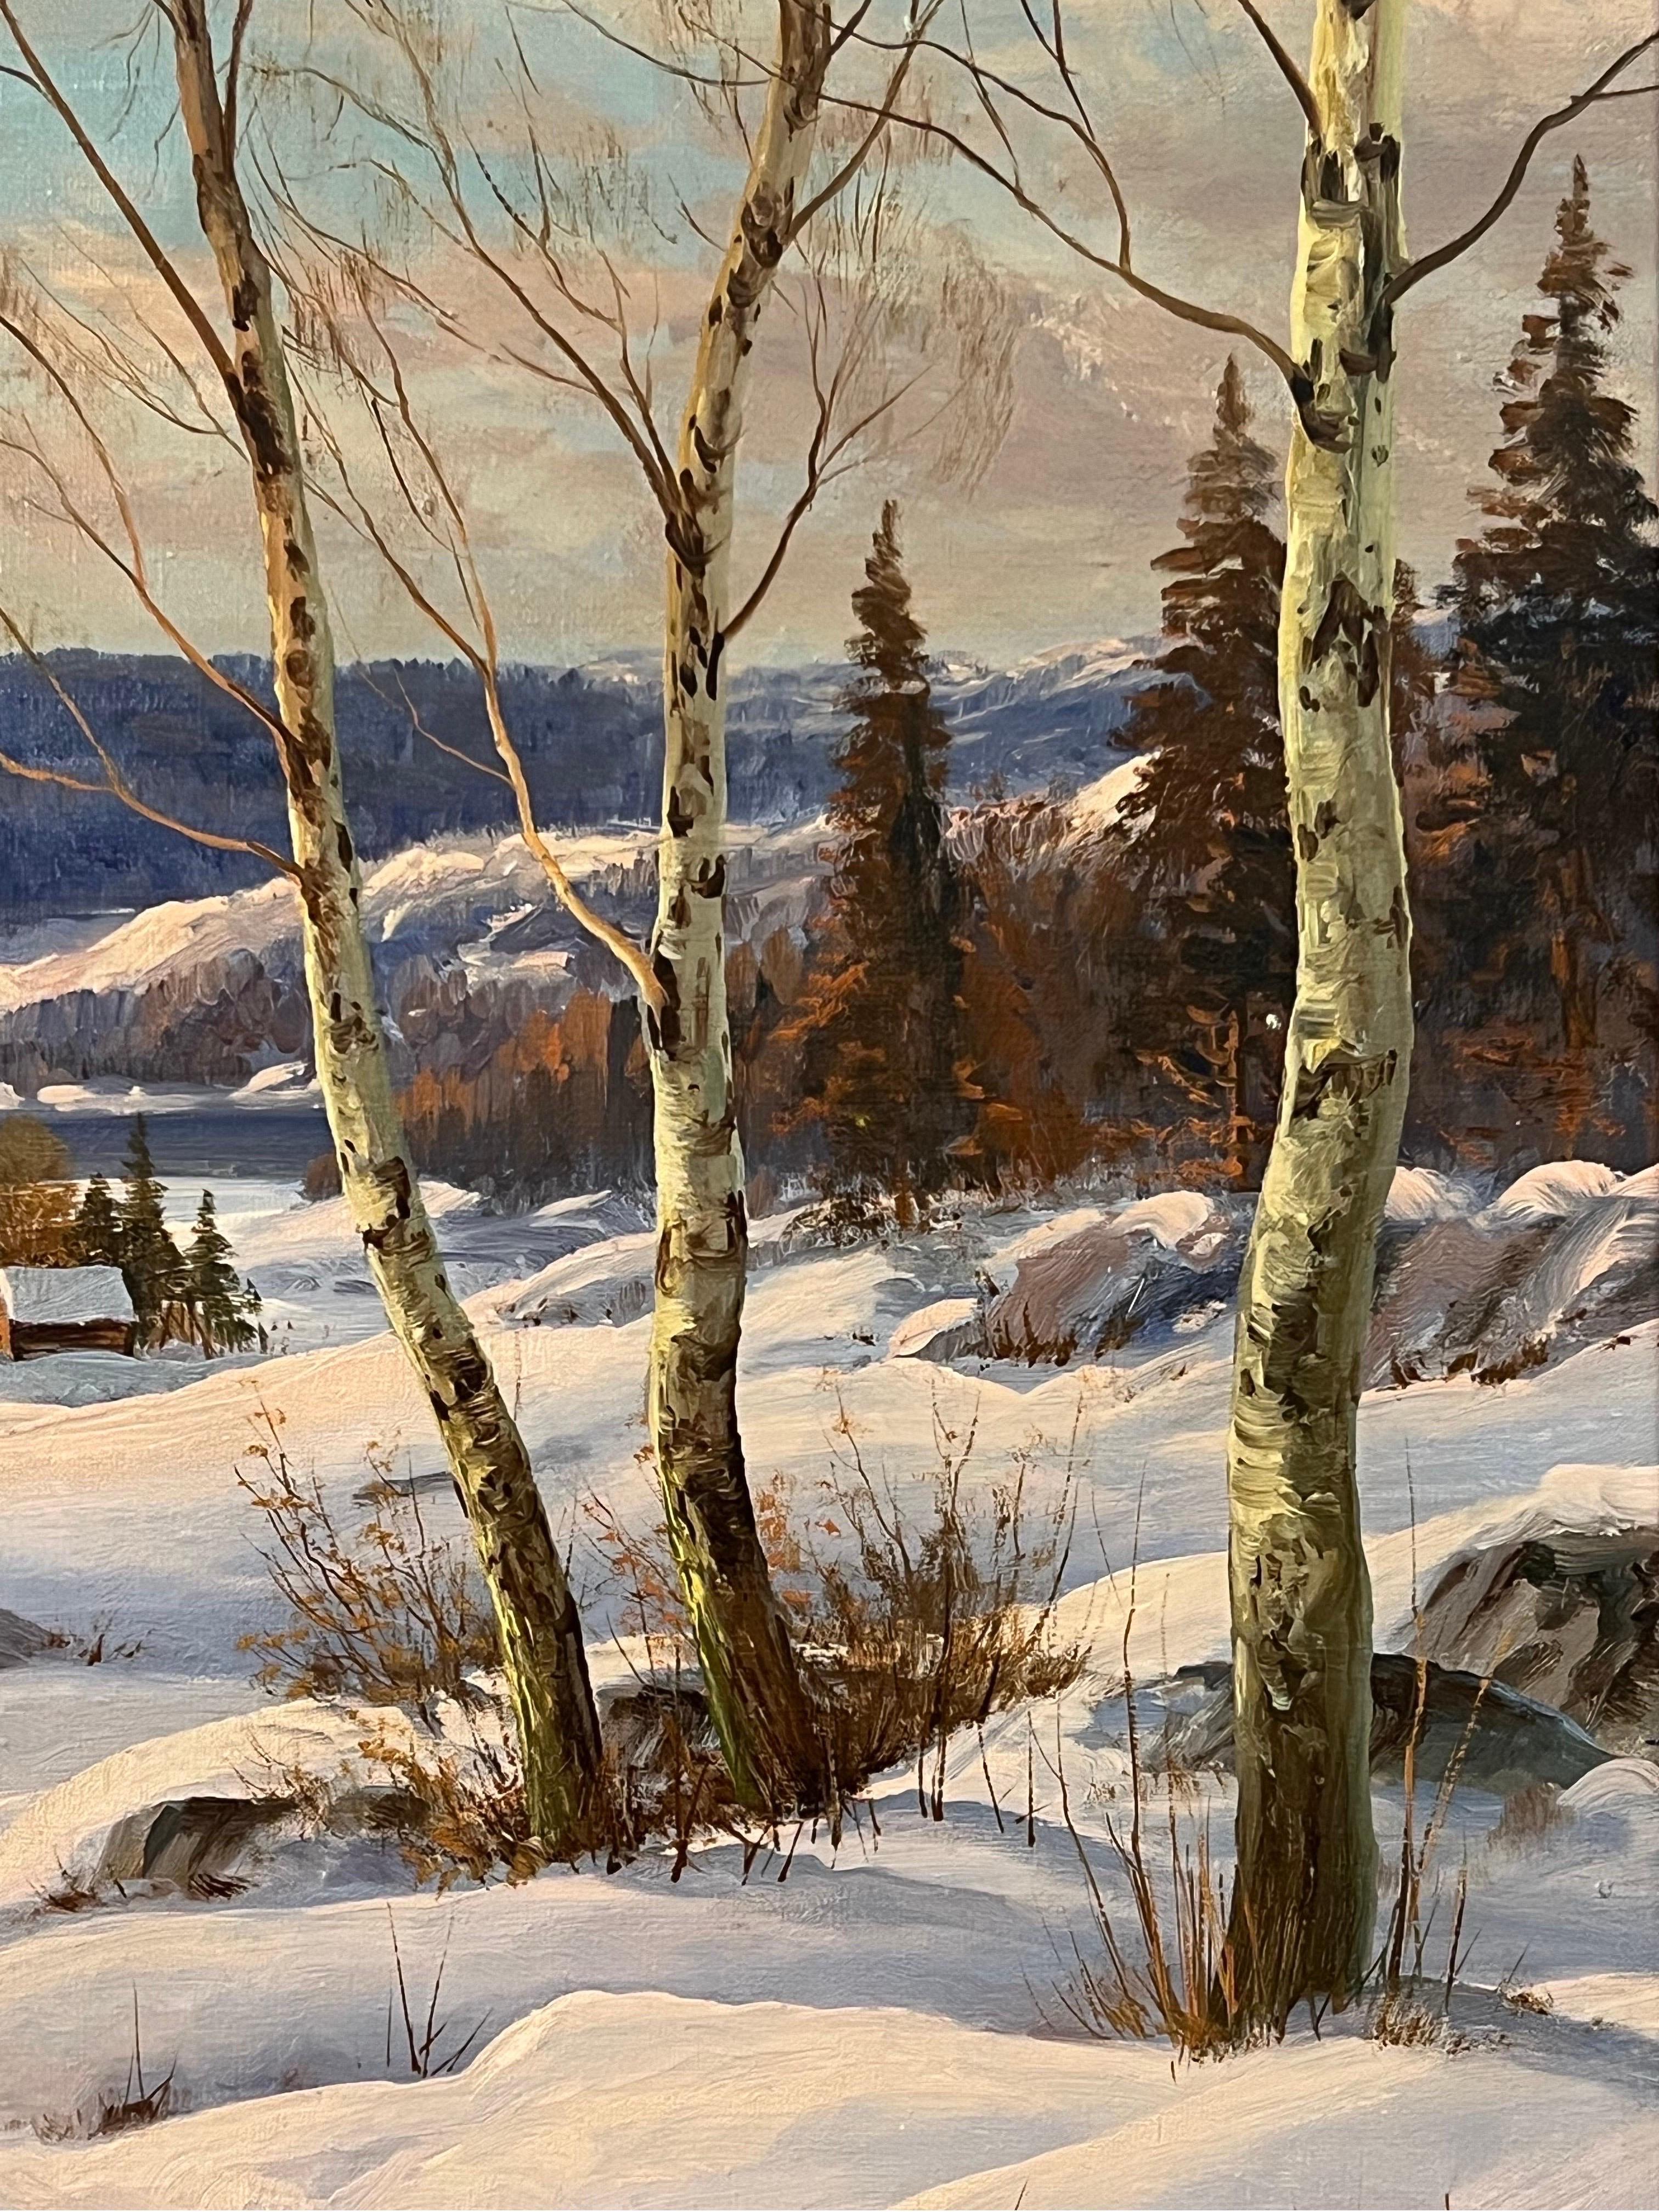 Swedish Hamlet in a Snowy Winter Landscape with Birch Trees by Danish Artist, Jens Christian Bennedsen (1893-1967). 

Art measures 38 x 26 inches
Frame measures 44 x 32 inches

An oil painting of an idyllic Scandinavian Snowy Winter Landscape by